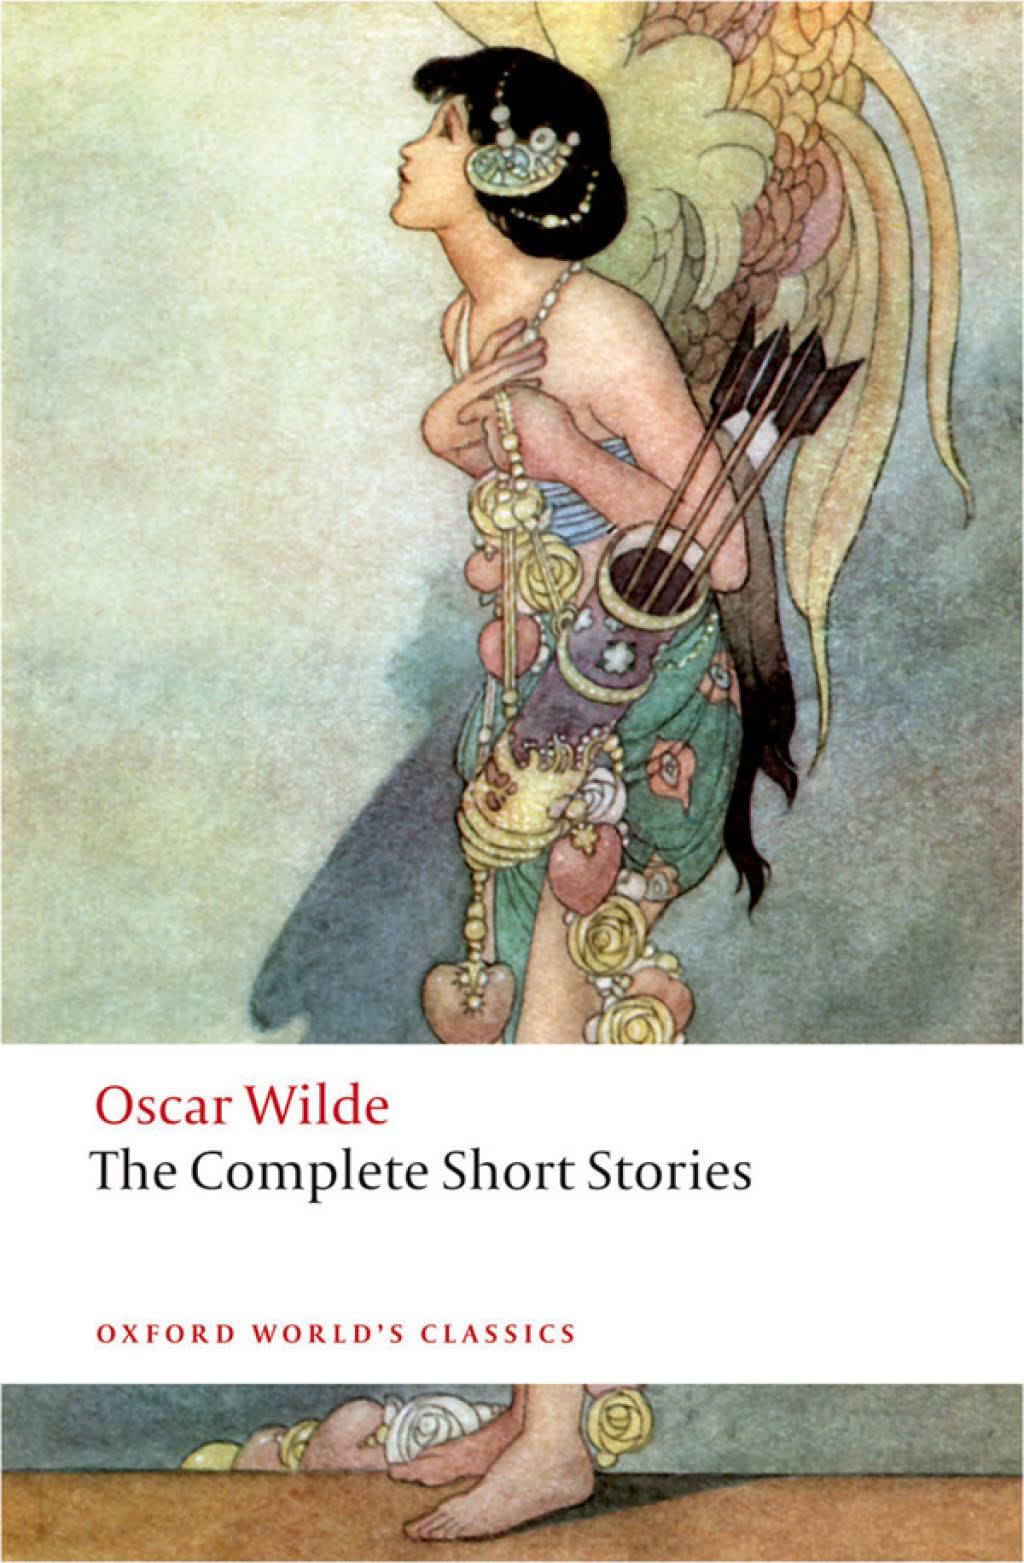 The Complete Short Stories [Book]